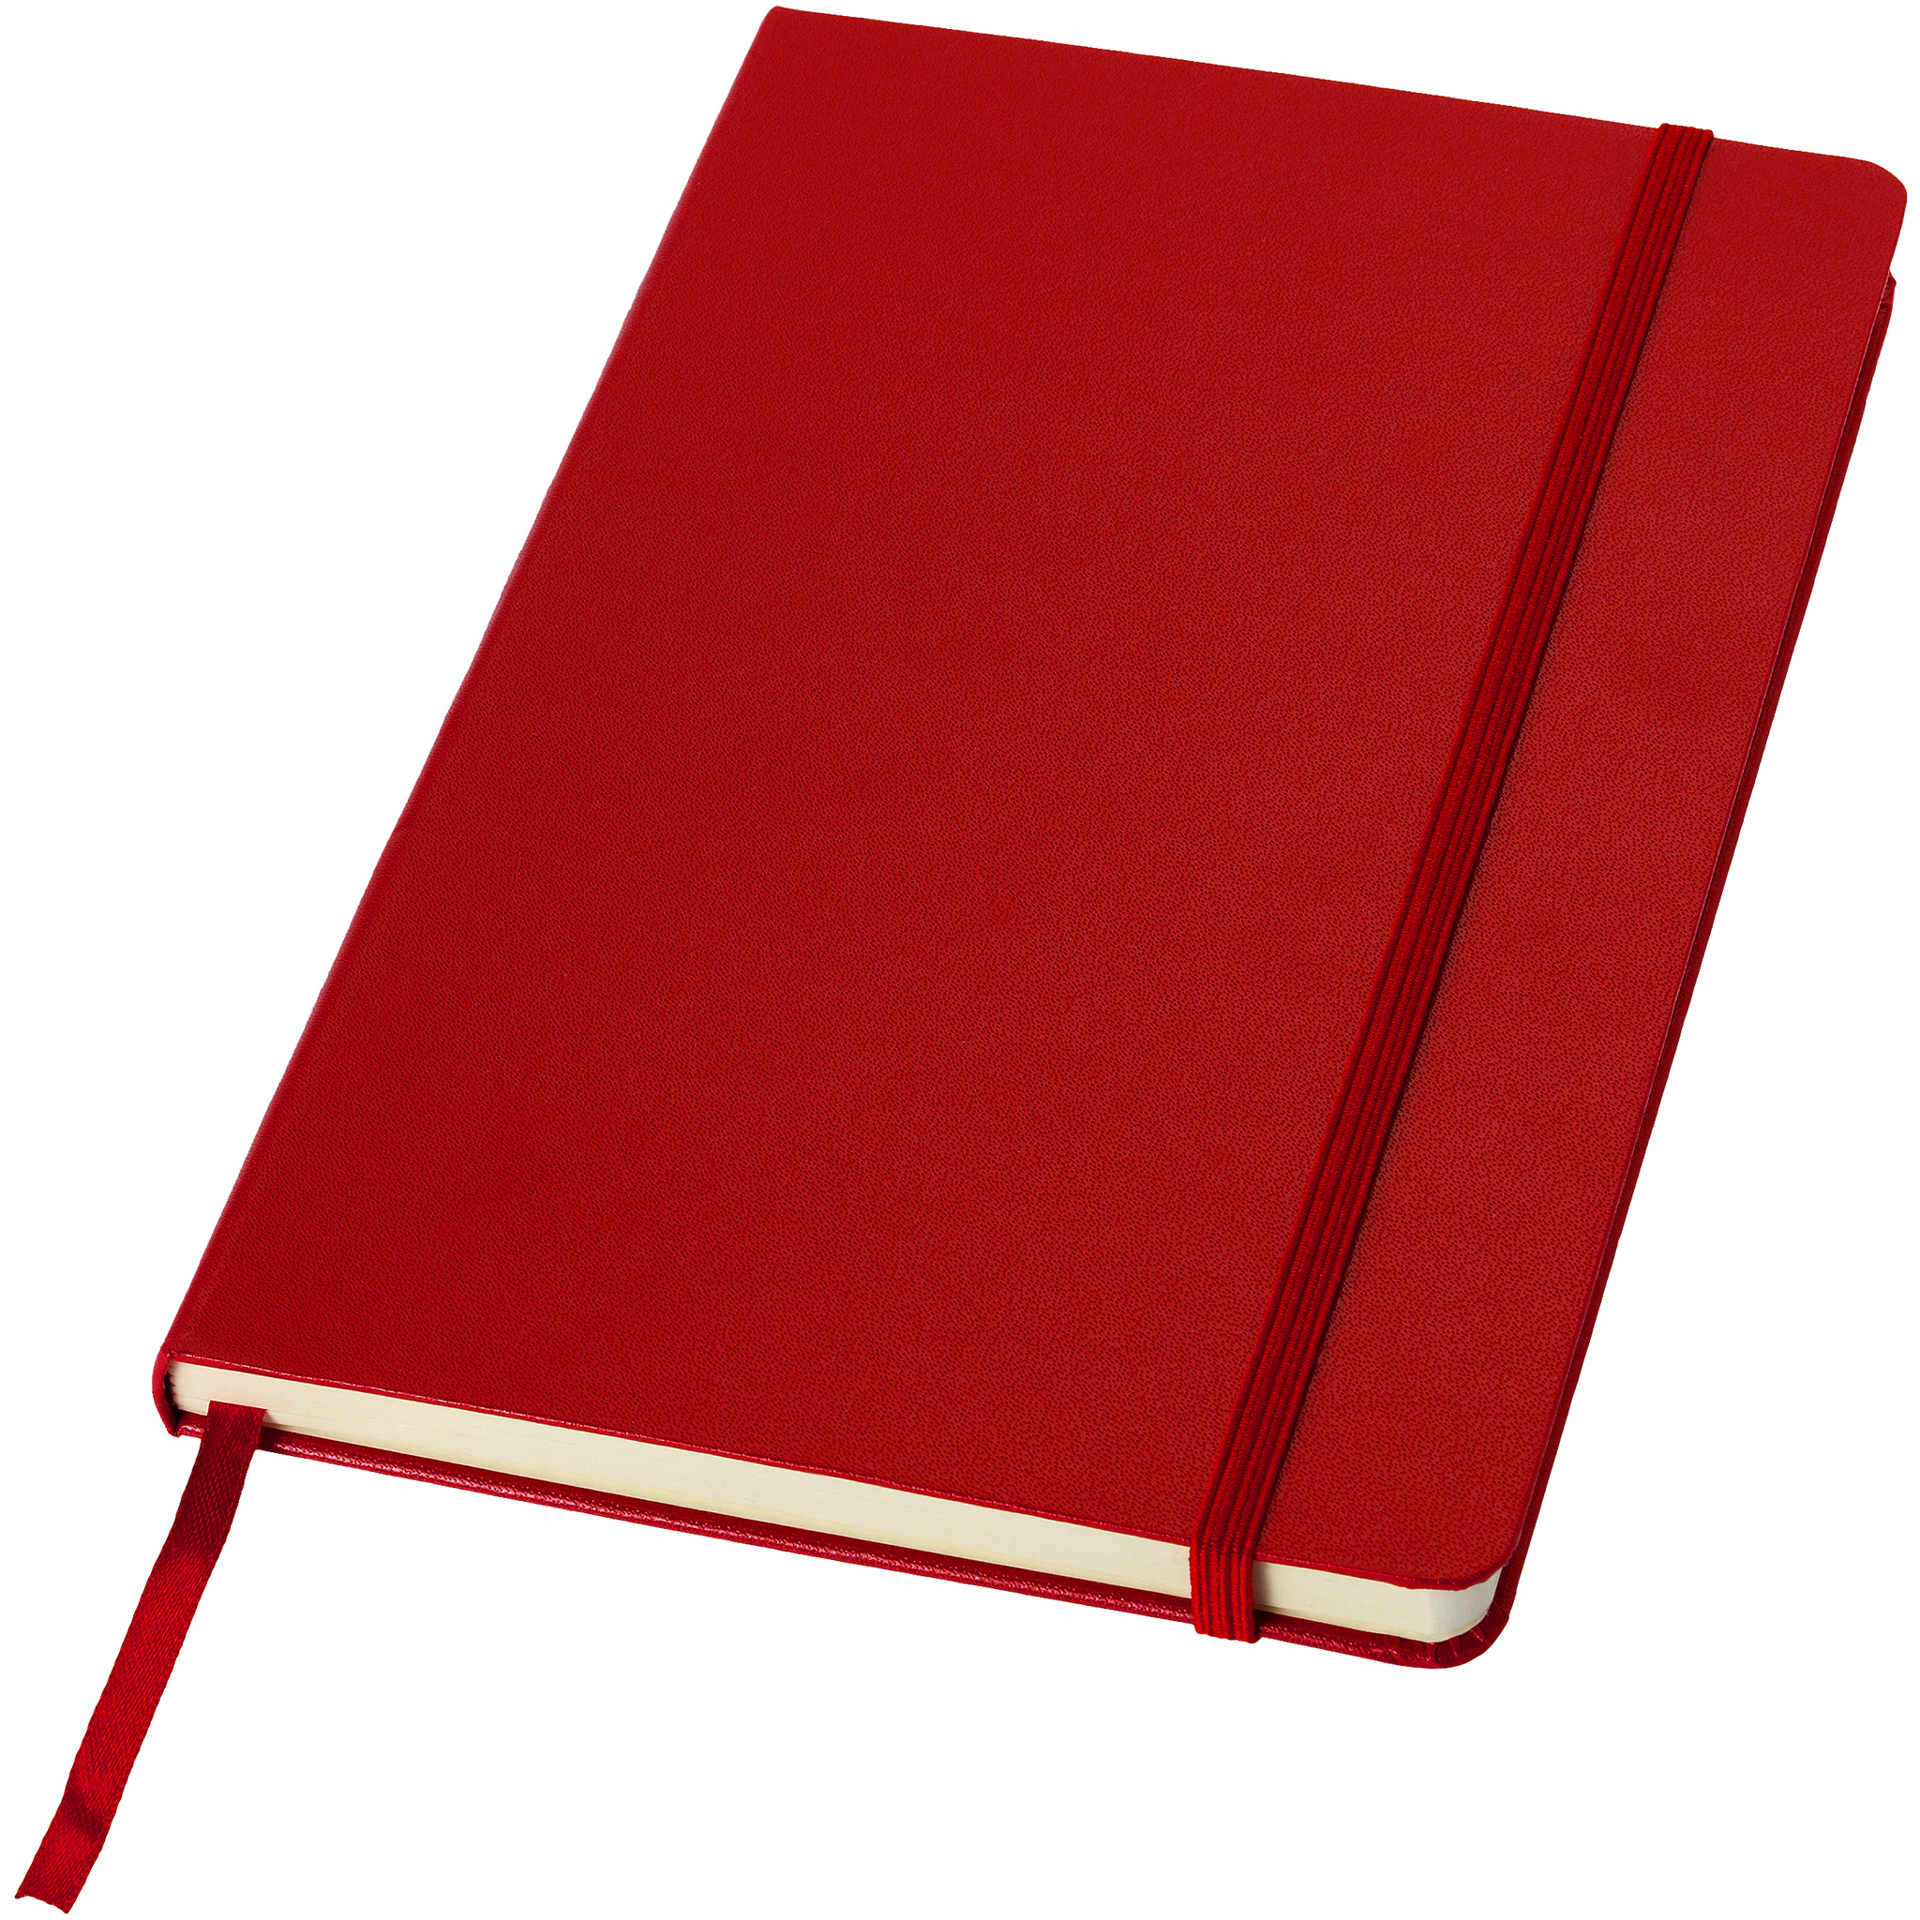 A5 hard cover notebook in red with red elastic closure and ribbon